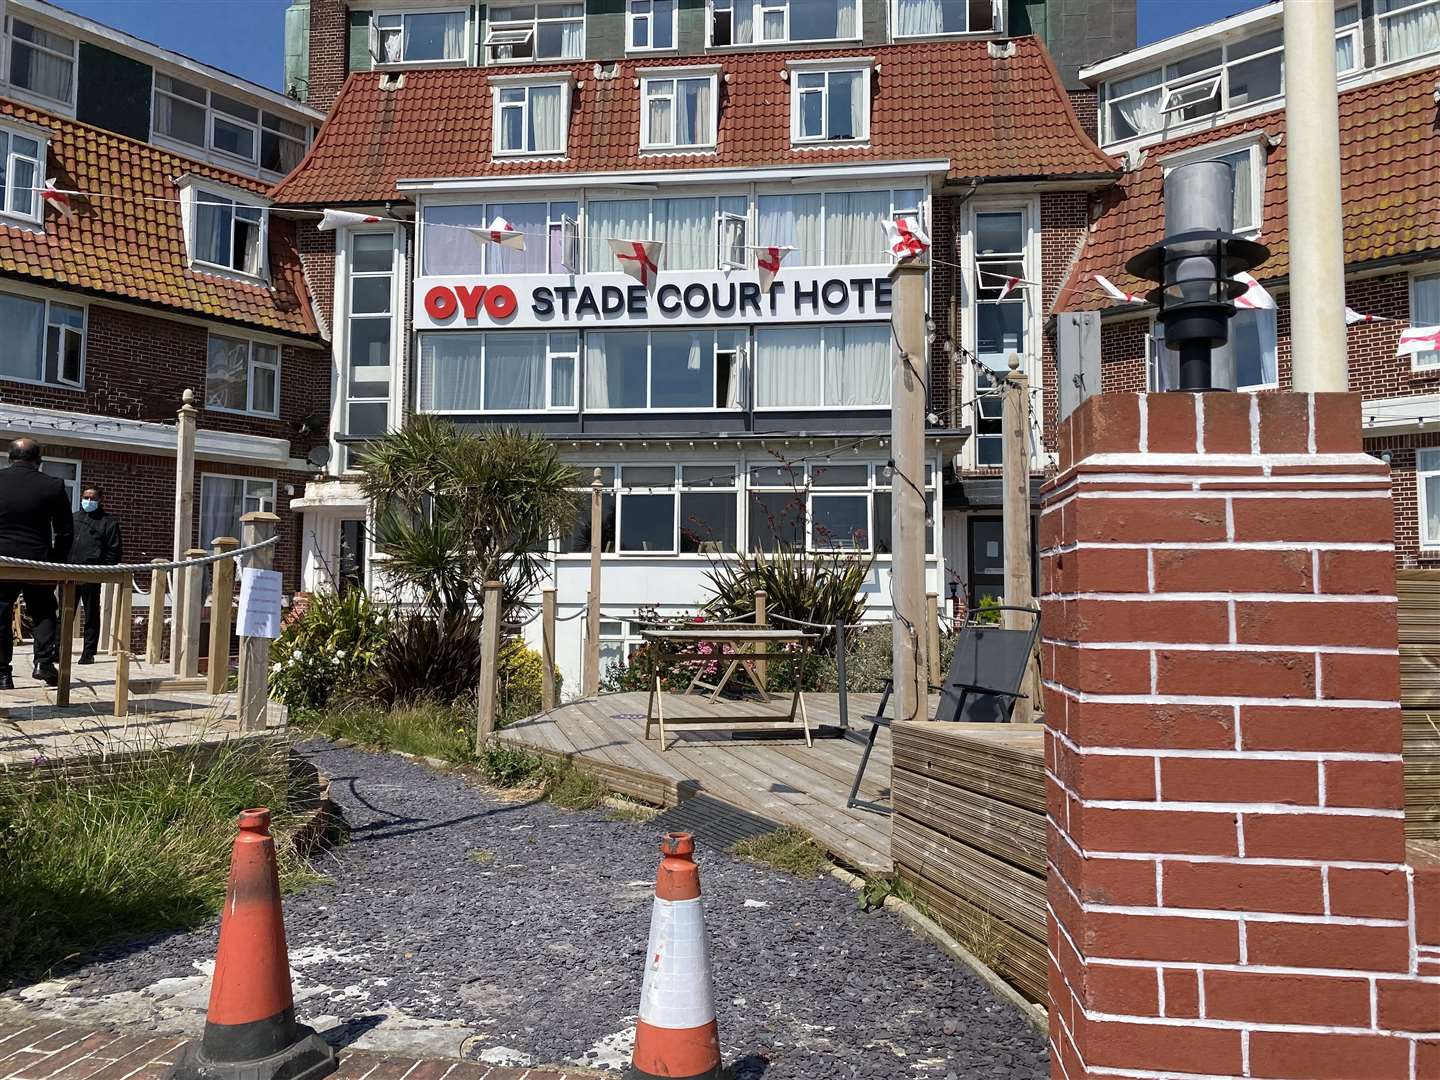 Stade Court Hotel, Hythe, is closed and has three security guards positioned out front